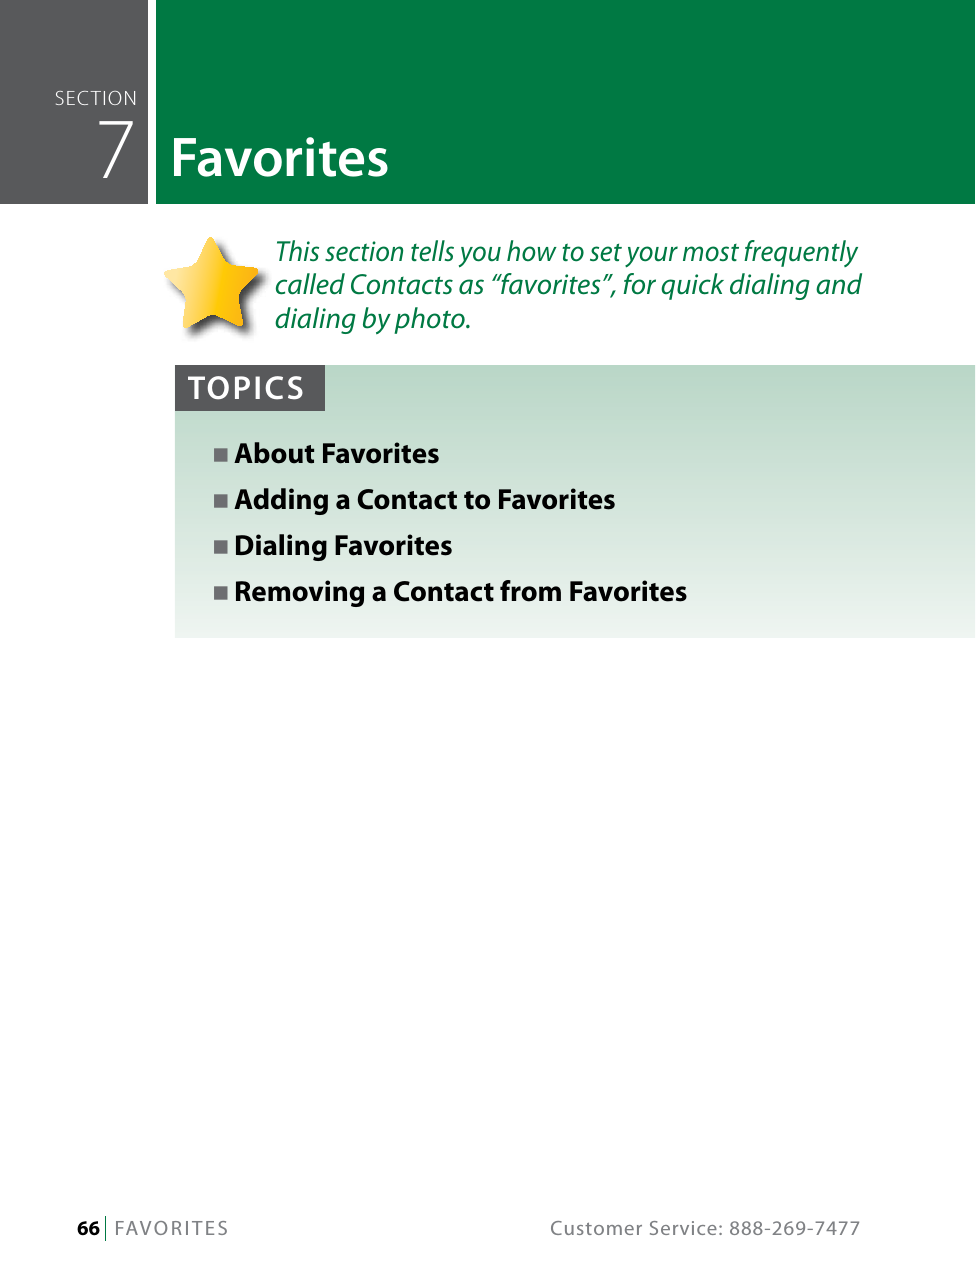 66   FAVORITES  Customer Service: 888-269-7477This section tells you how to set your most frequently called Contacts as “favorites”, for quick dialing and dialing by photo.seCTiOn  7FavoritesTOPICSN About FavoritesN Adding a Contact to FavoritesN Dialing FavoritesN Removing a Contact from Favorites